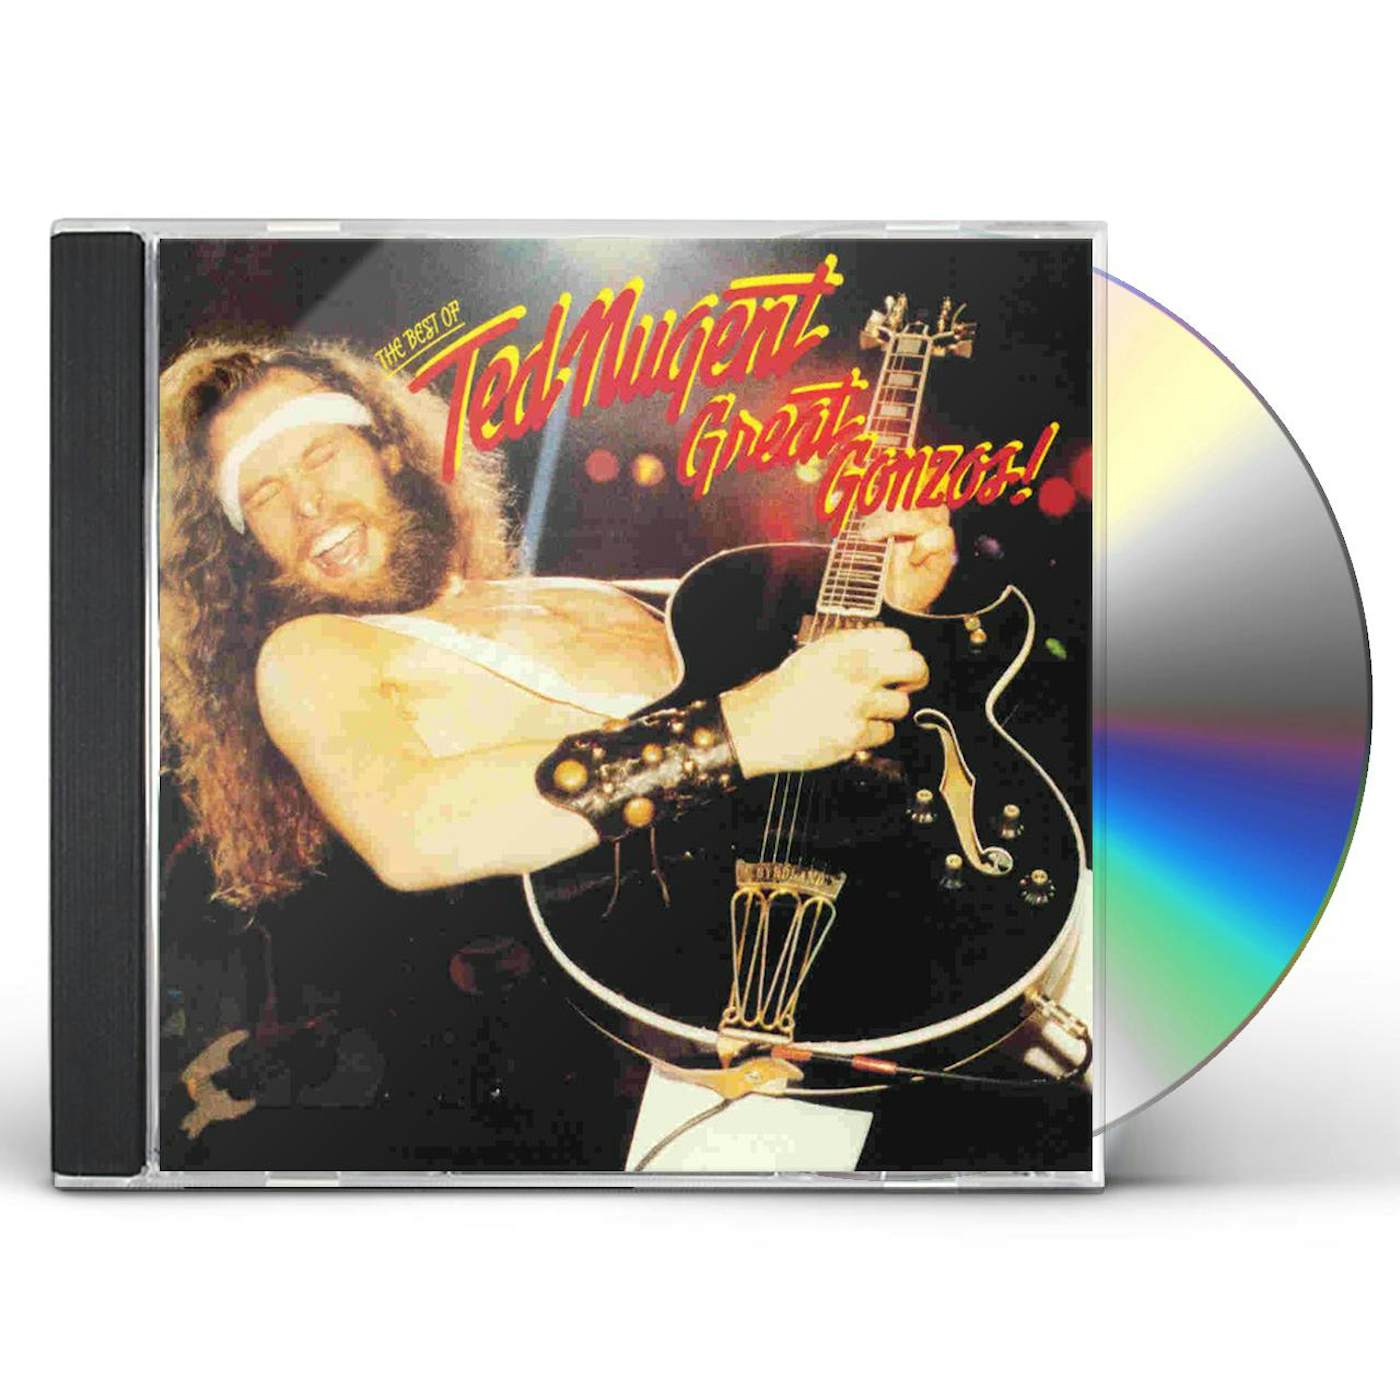 GREAT GONZOS: BEST OF TED NUGENT CD